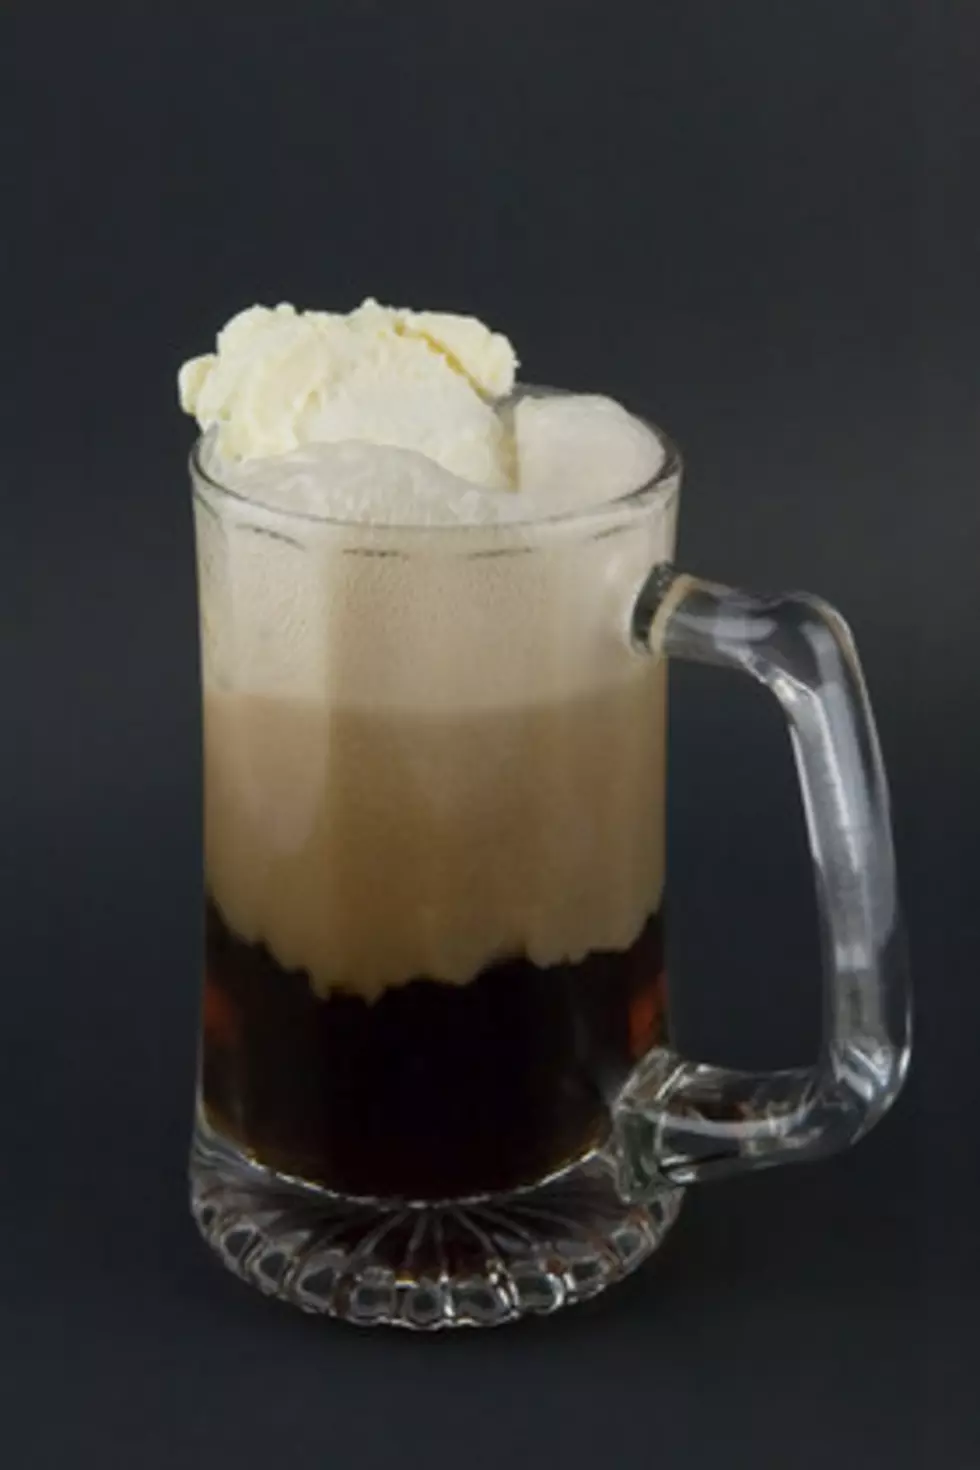 FREE Root Beer Float Today!